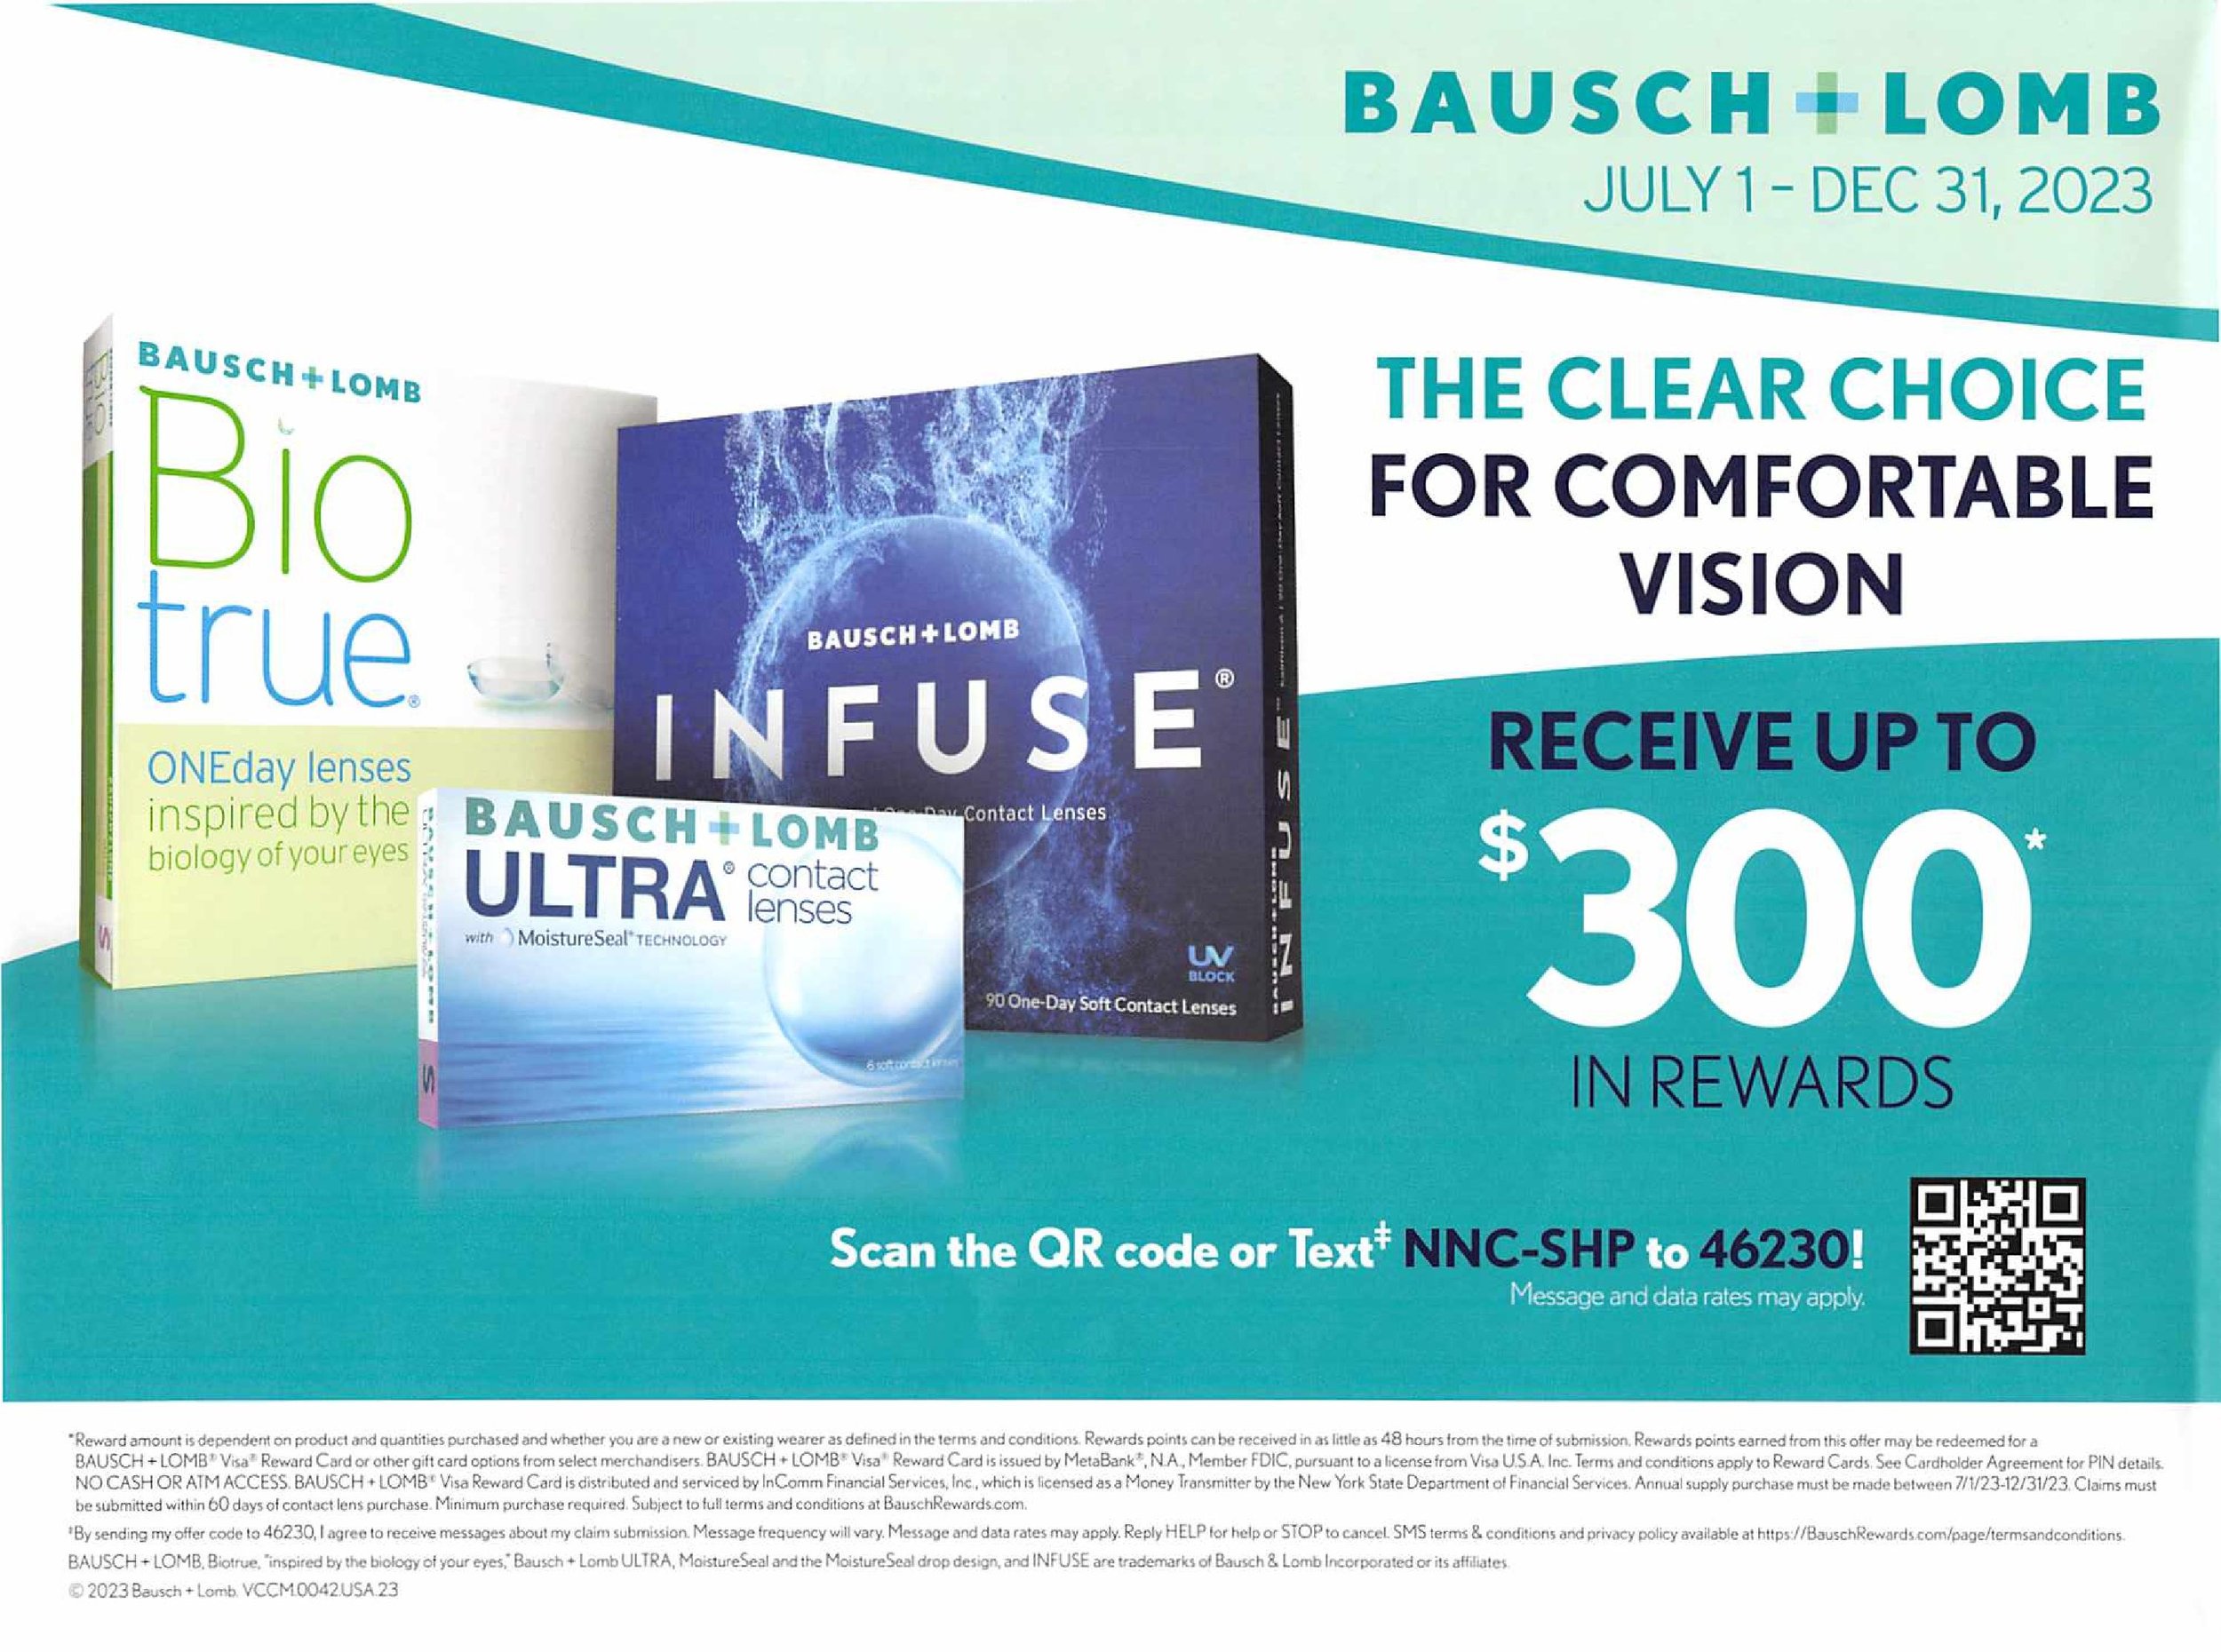 get-up-to-a-300-rebate-on-bausch-lomb-contact-lenses-sunshine-optometry